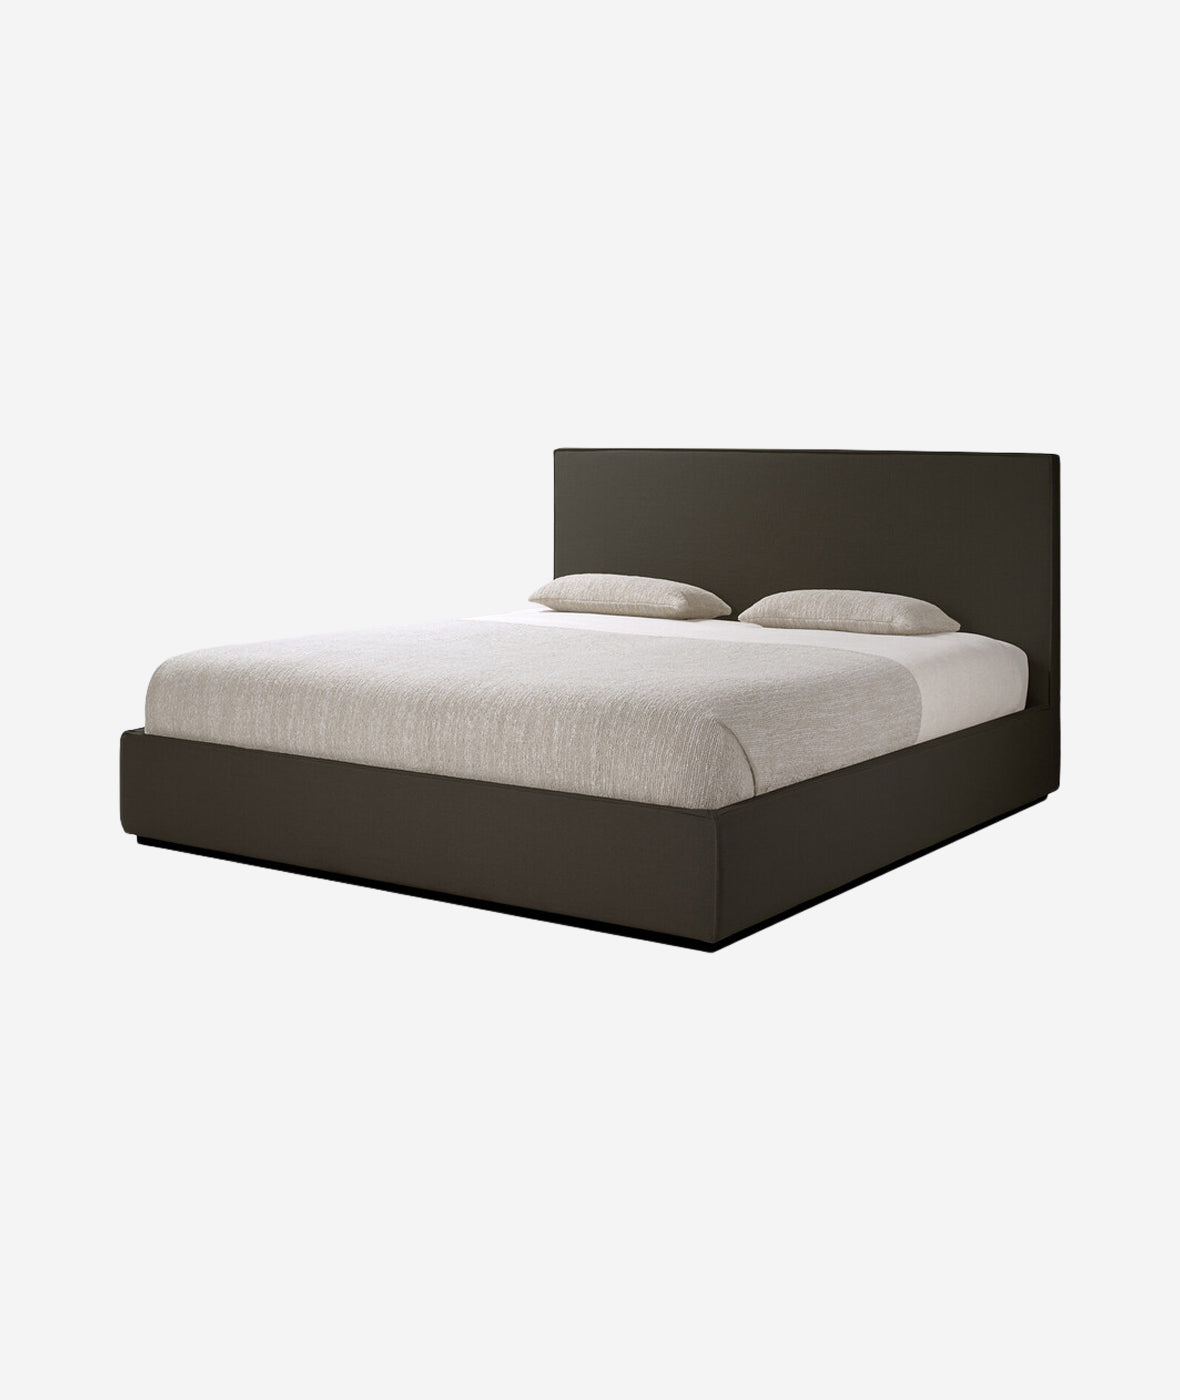 Revive Bed - More Options